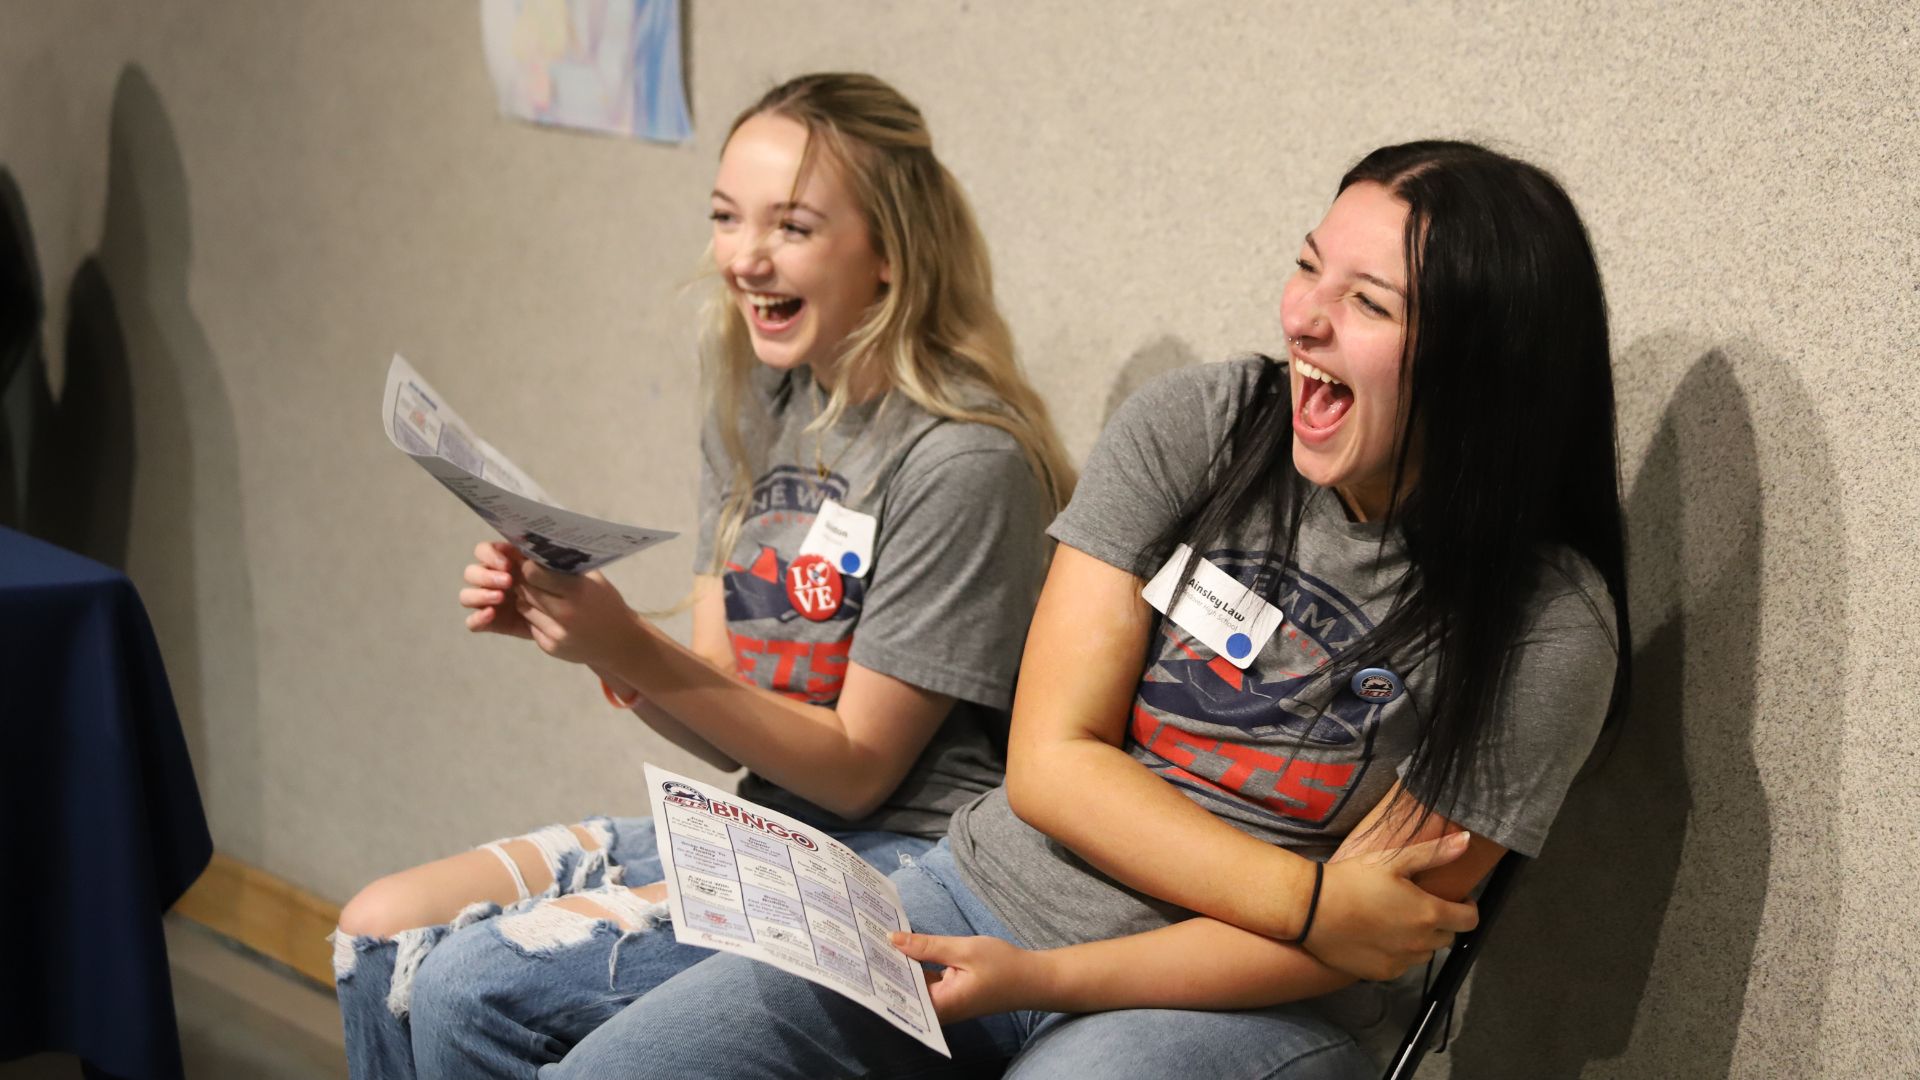 Two female students laugh while holding up caricature artwork from Jet Fest in the spring.